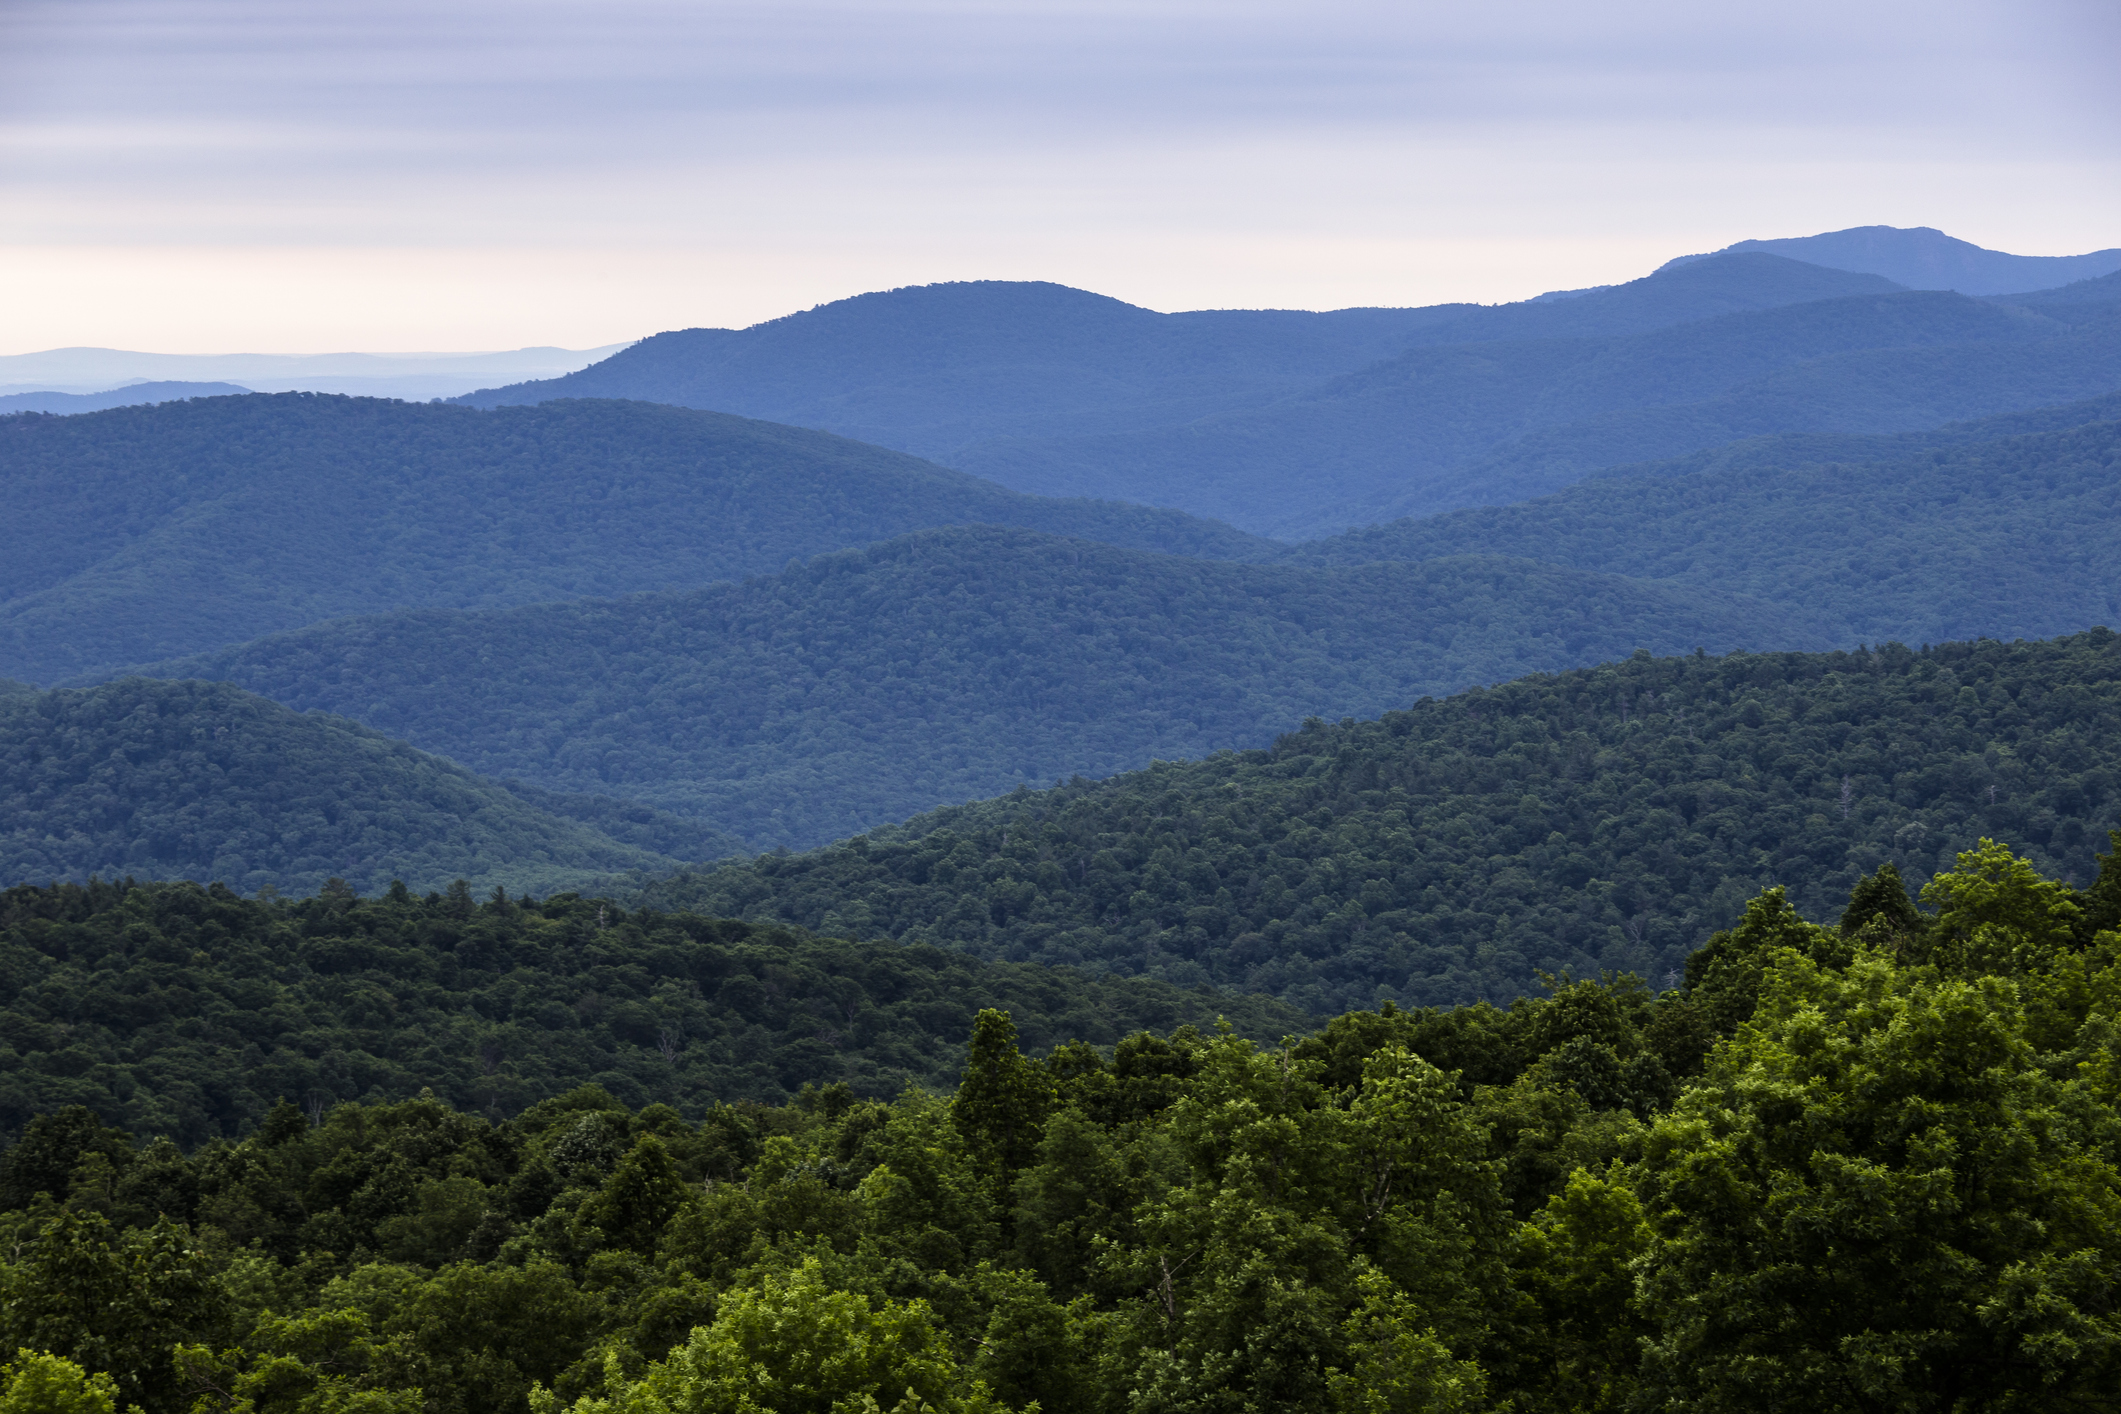 At Nearly 1 Billion Years Old, Some Of The Oldest Mountains In The World Are Found In Virginia